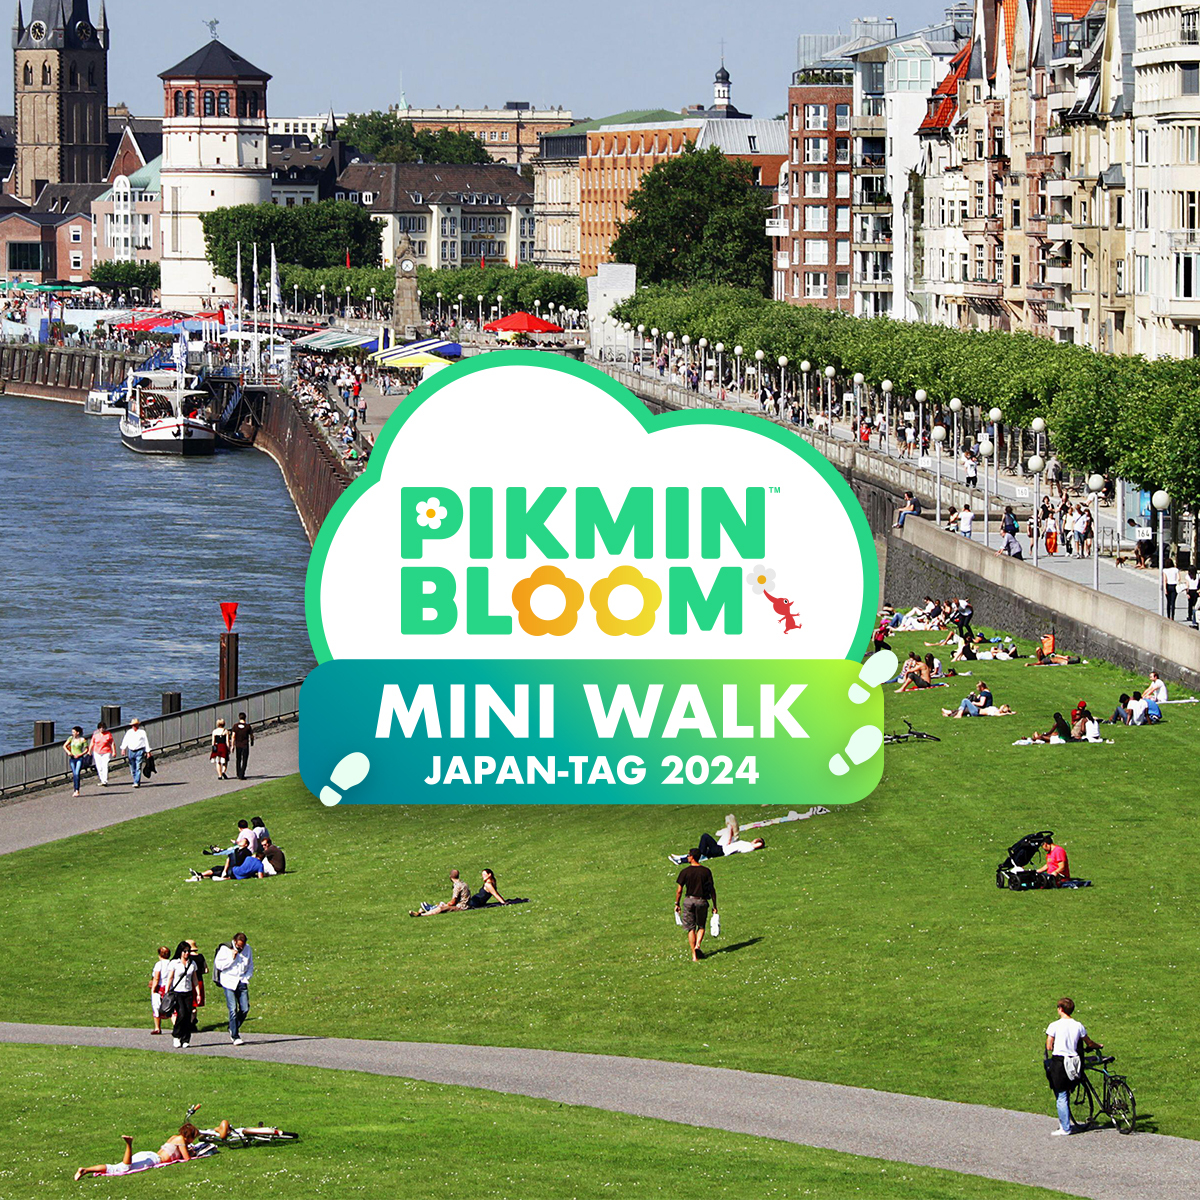 Pikmin Bloom MINI WALK is coming to Europe! This coming June 1st, we will be holding our very first MINI WALK event outside Asia, at Japan-Tag in Düsseldorf, Germany 🇩🇪 pikminbloom.com/news/june24-ja…